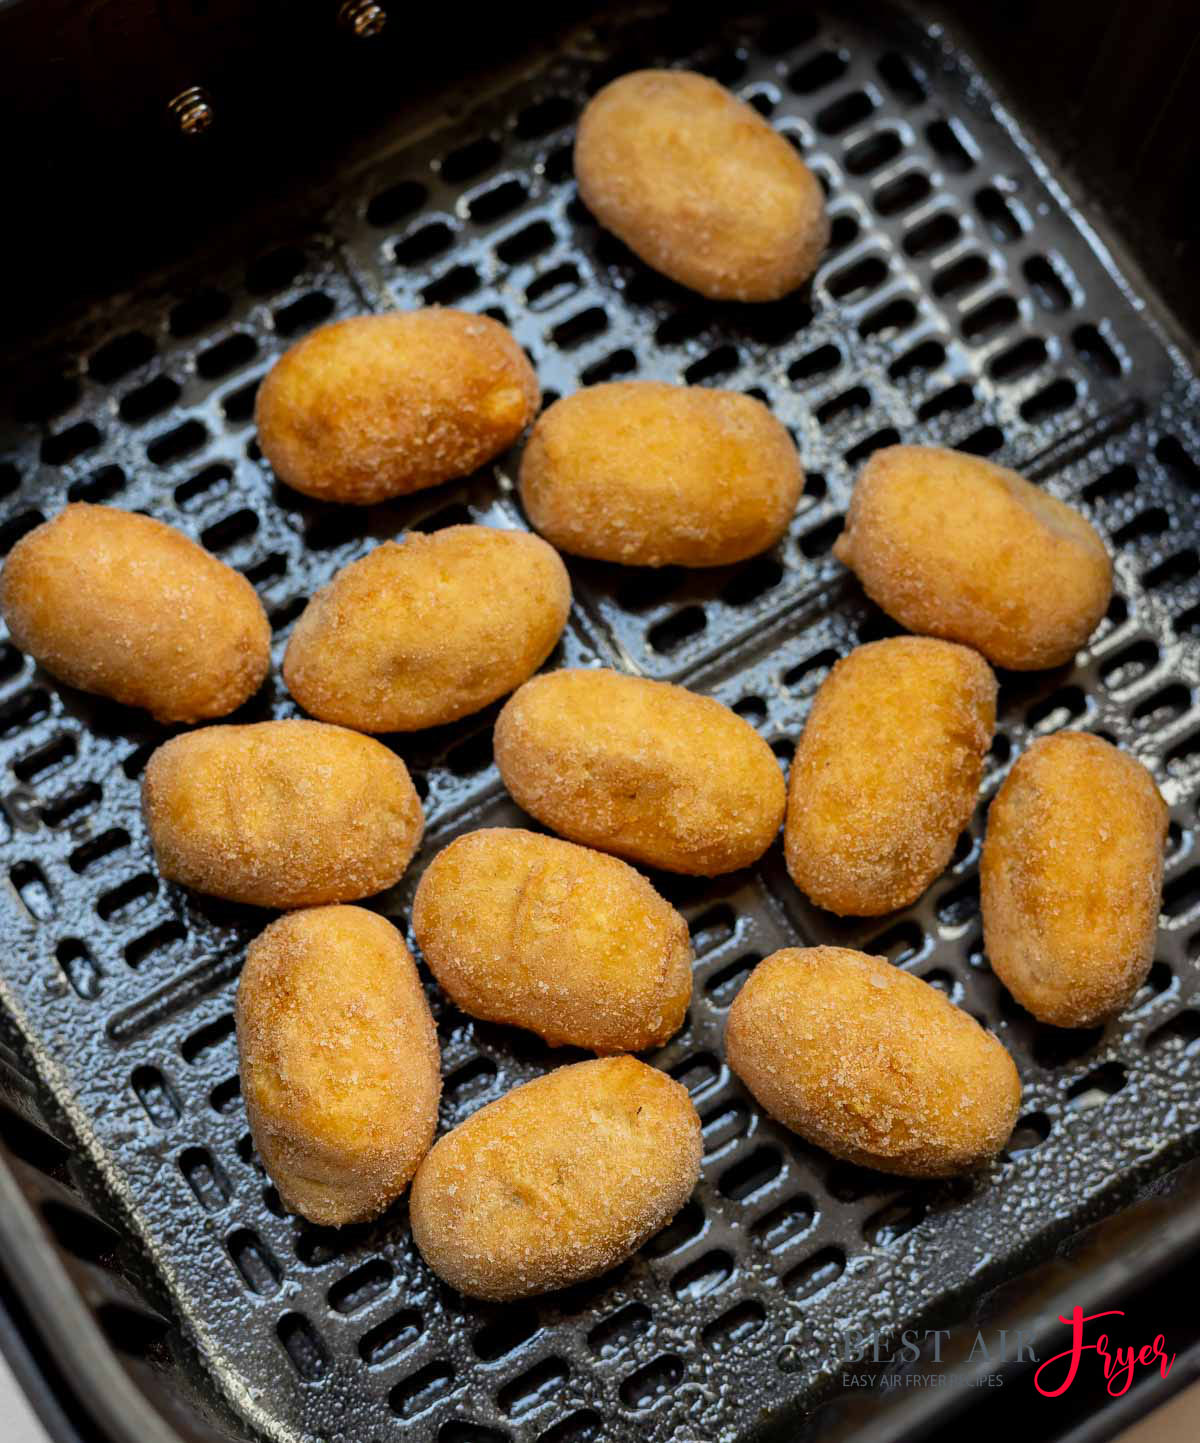 How To Cook Mini Corn Dogs In Air Fryer